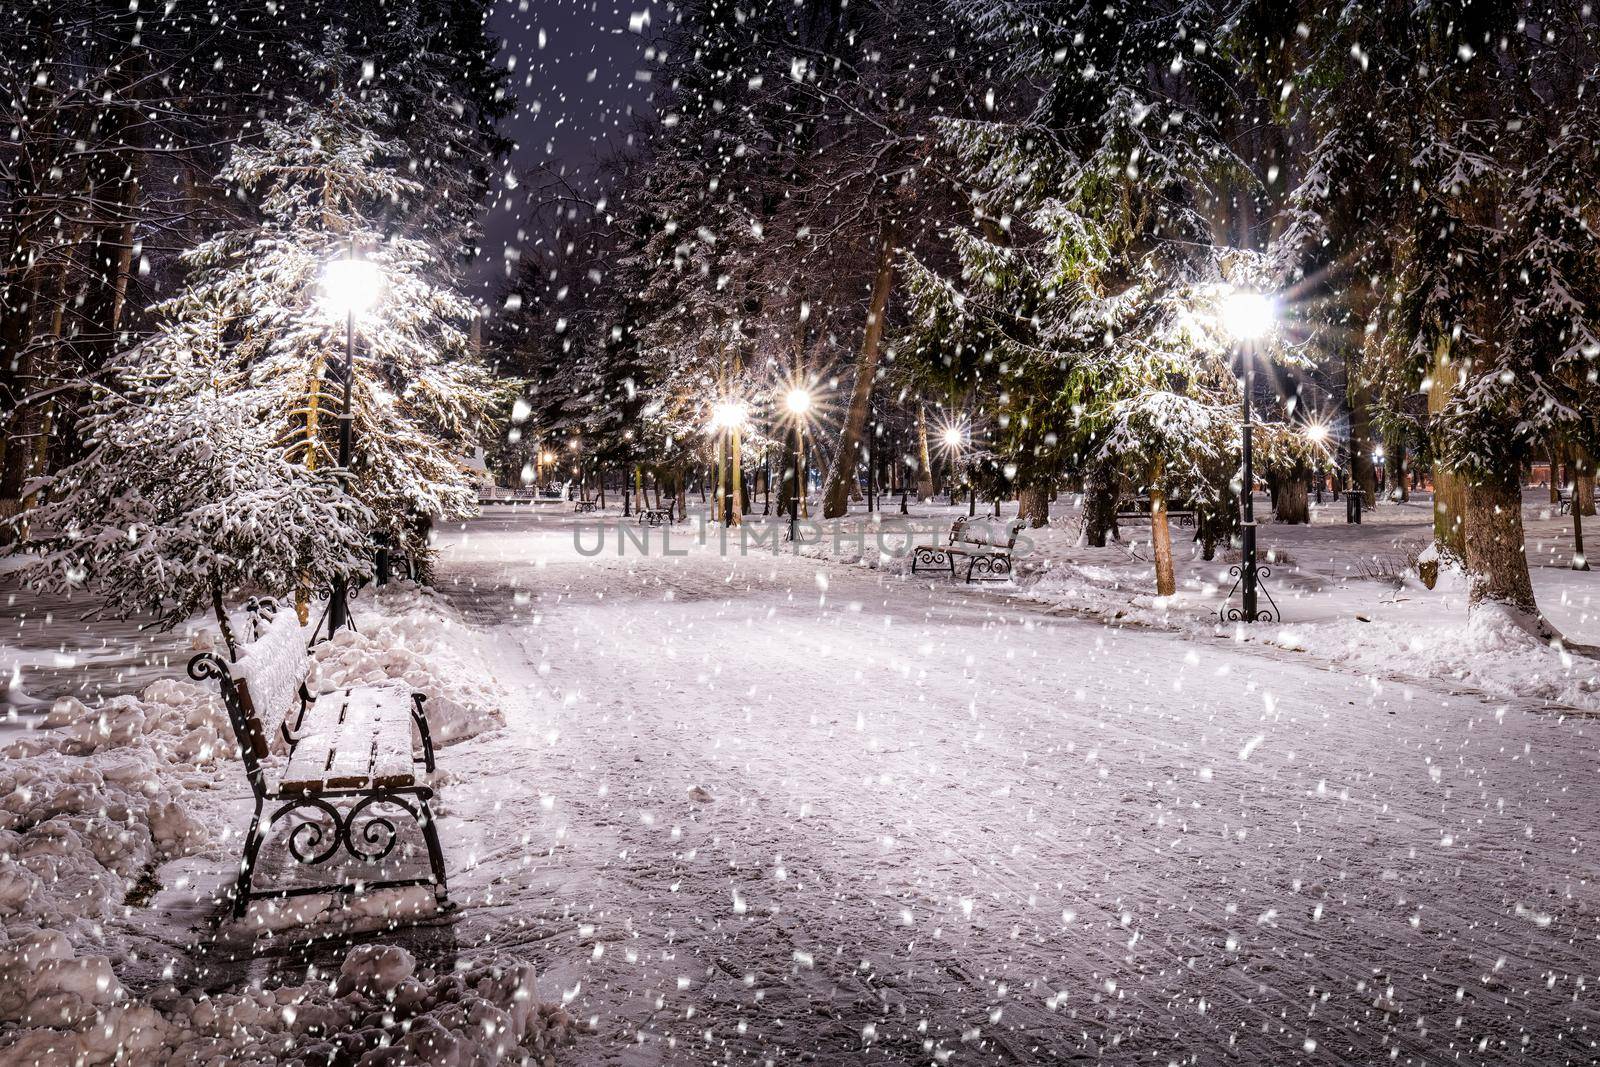 Snowfall in a winter park at night with christmas decorations, lights and  pavement covered with snow. by Eugene_Yemelyanov